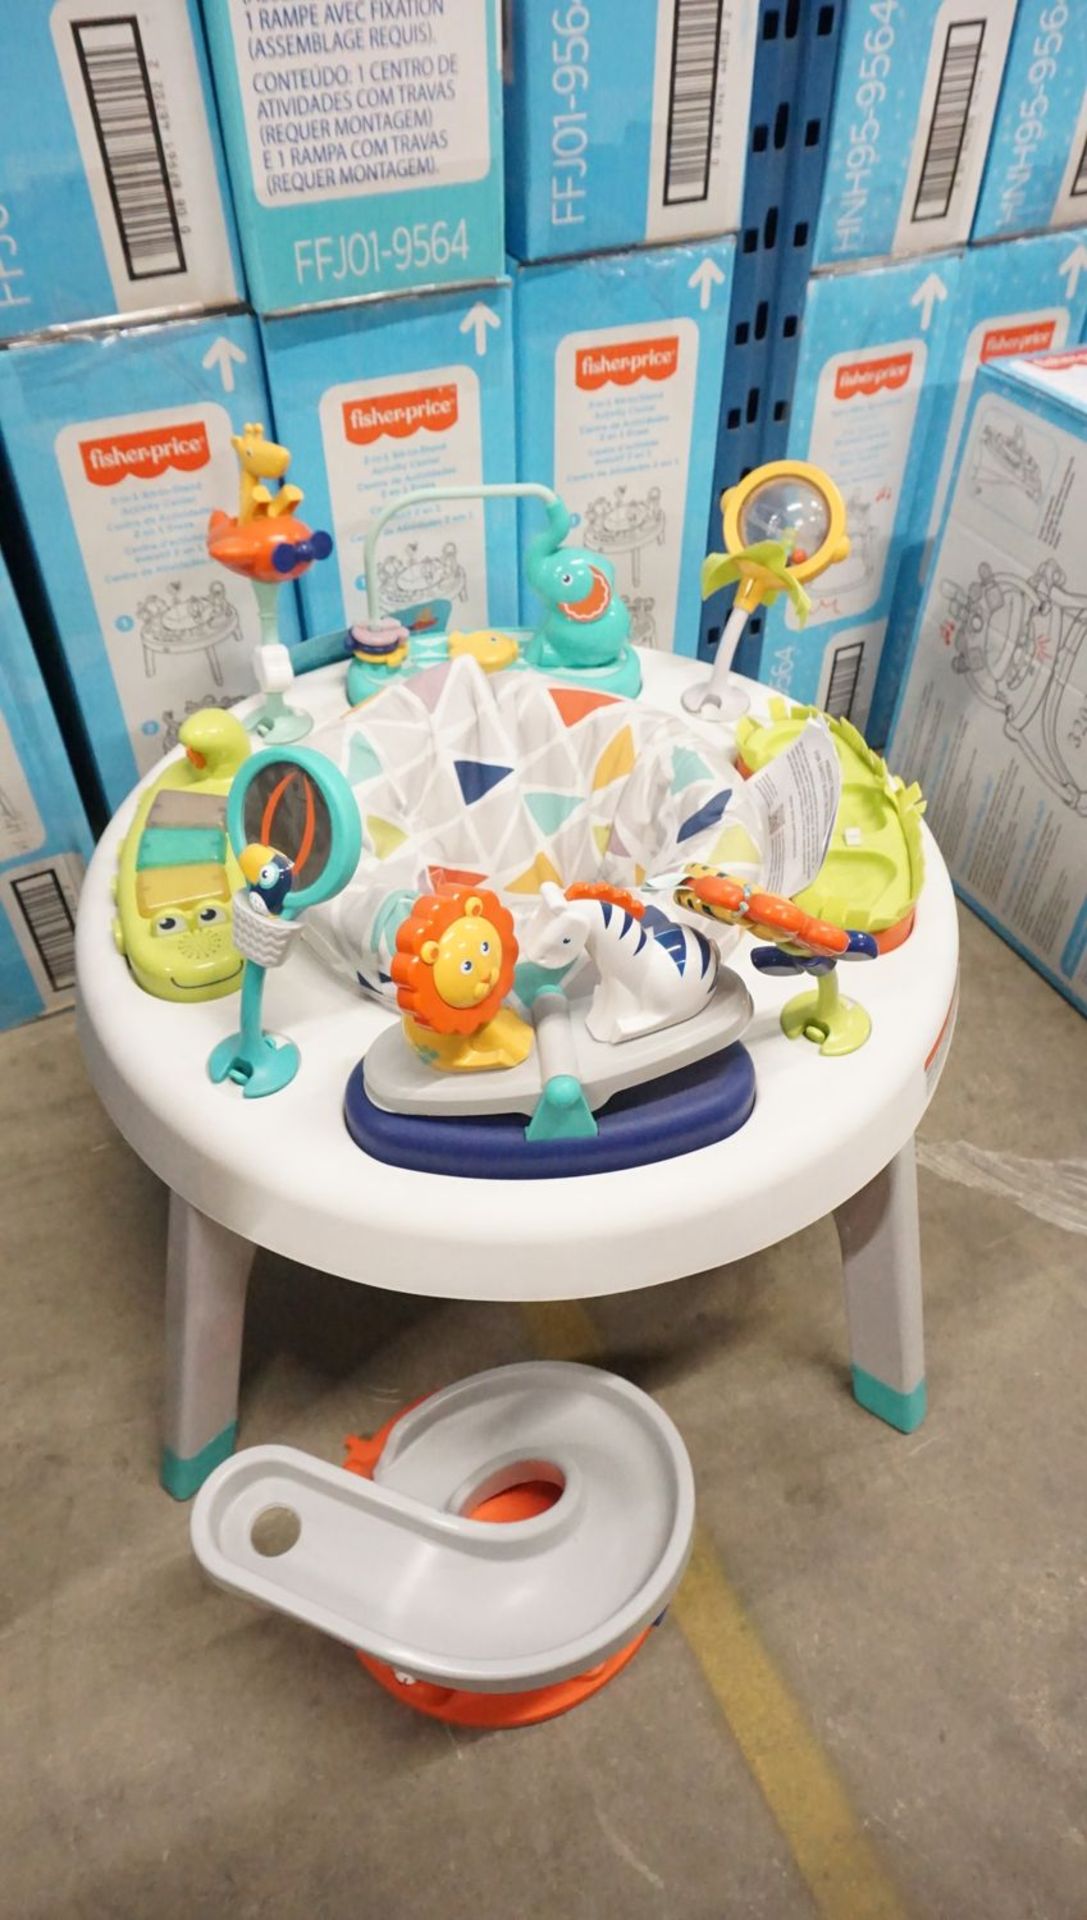 UNITS - FISHER PRICE 2-IN-1 SIT & STAND ACTIVITY CENTRE (FFJ01-9564) (MSRP 129.99) - Image 3 of 3